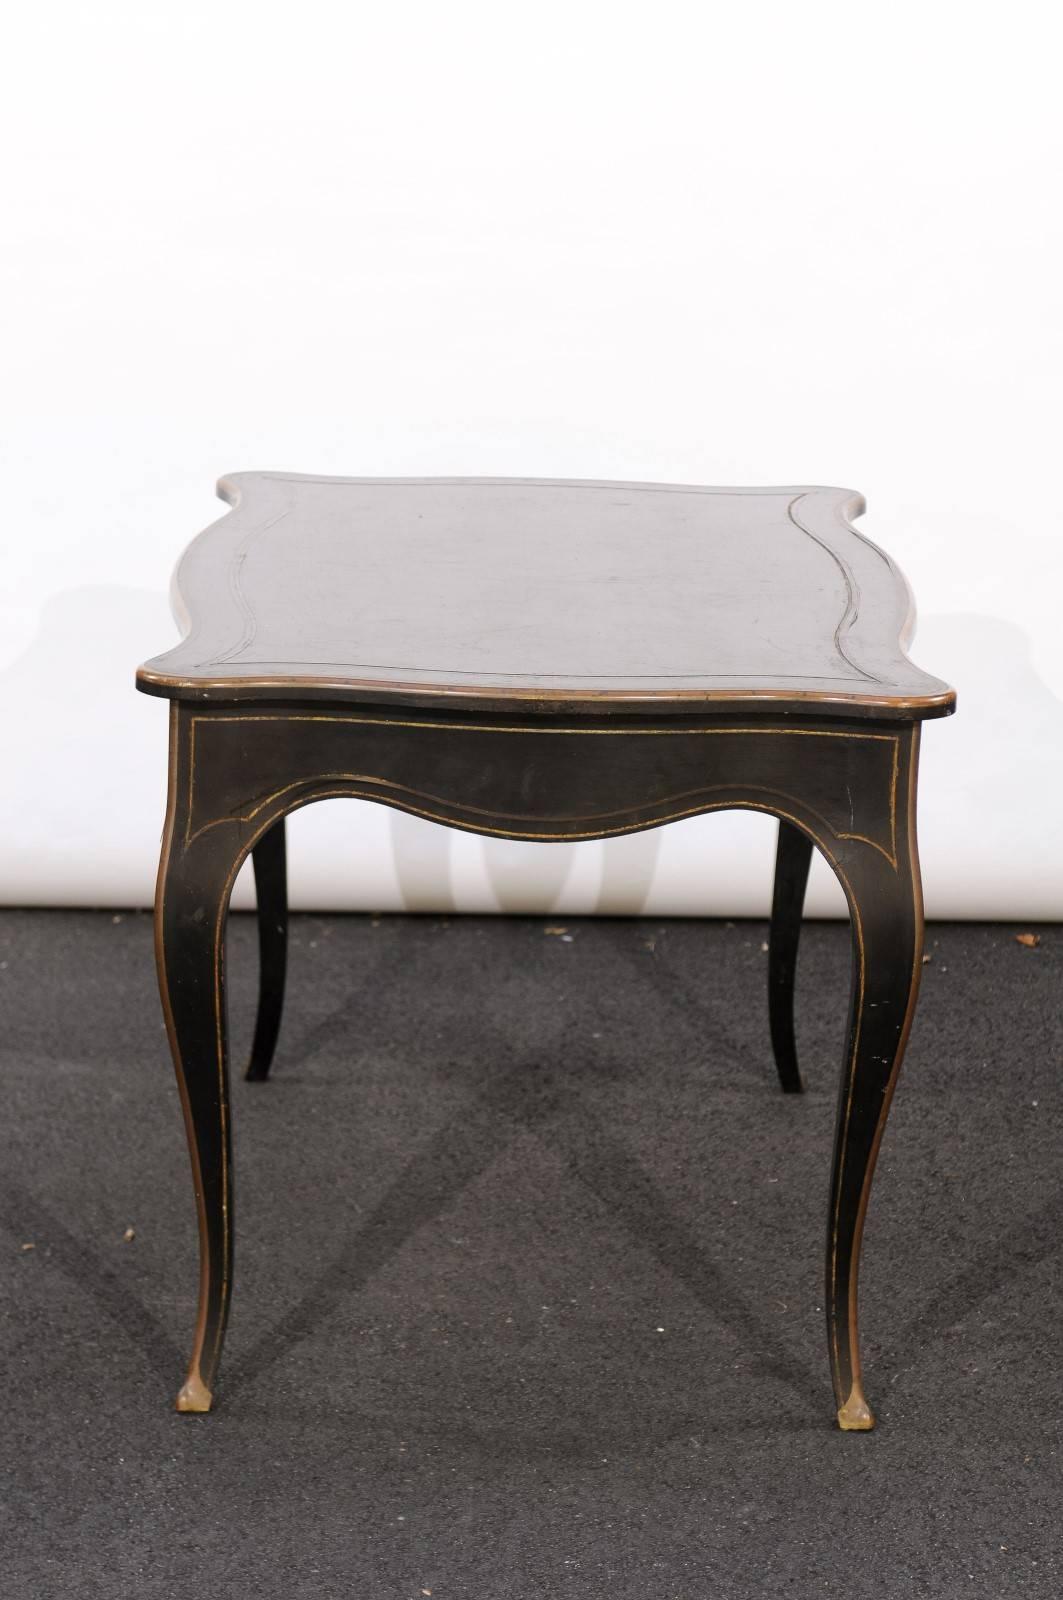 French Napoleon III Style Writing Table with Gilded Accents and Cabriole Legs For Sale 2